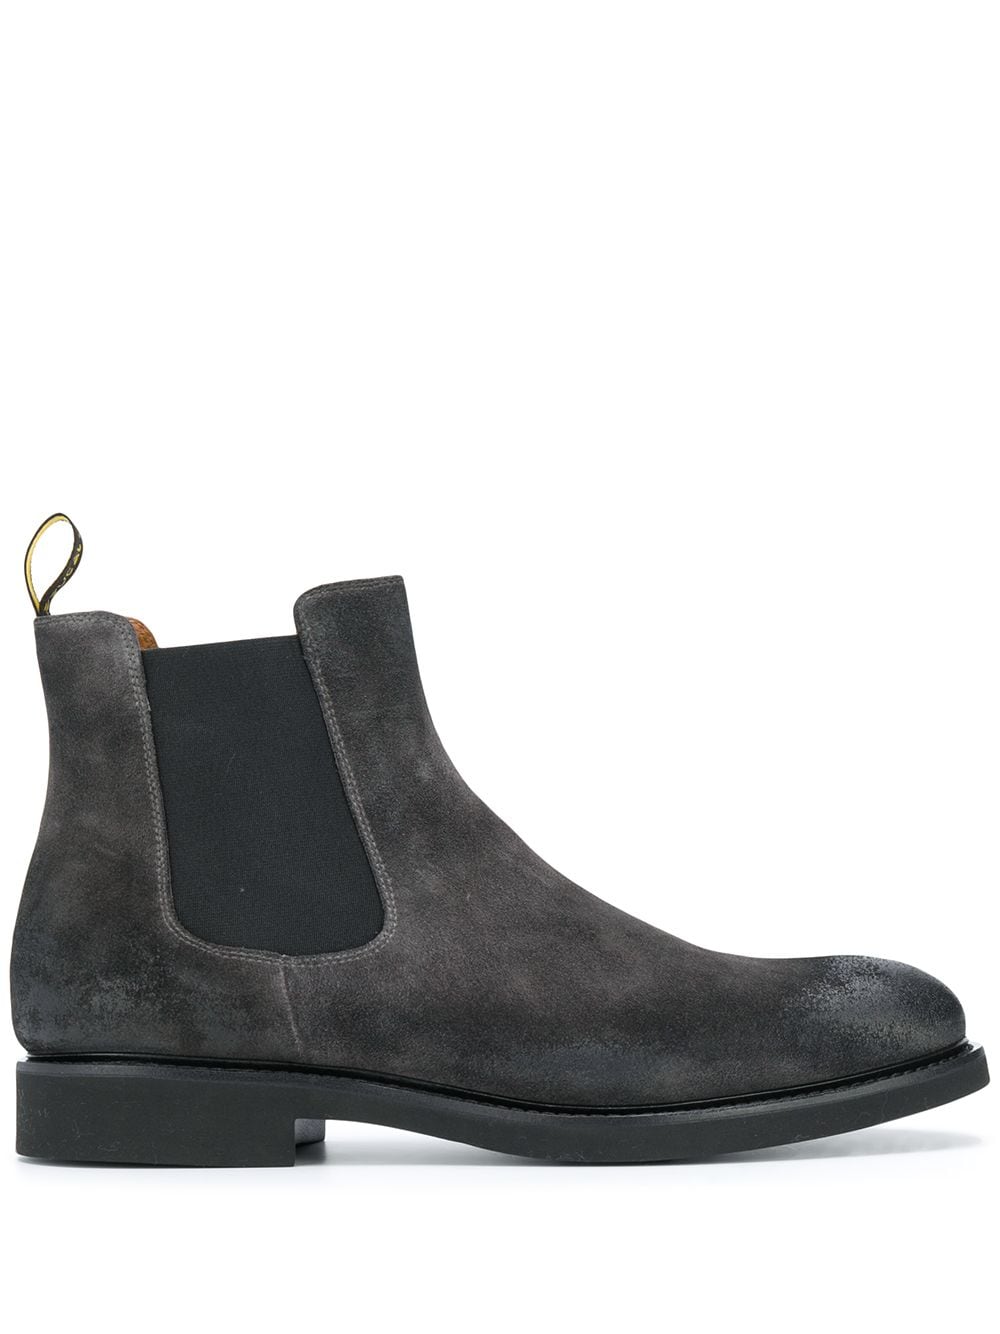 Image 1 of Doucal's Chelsea boots